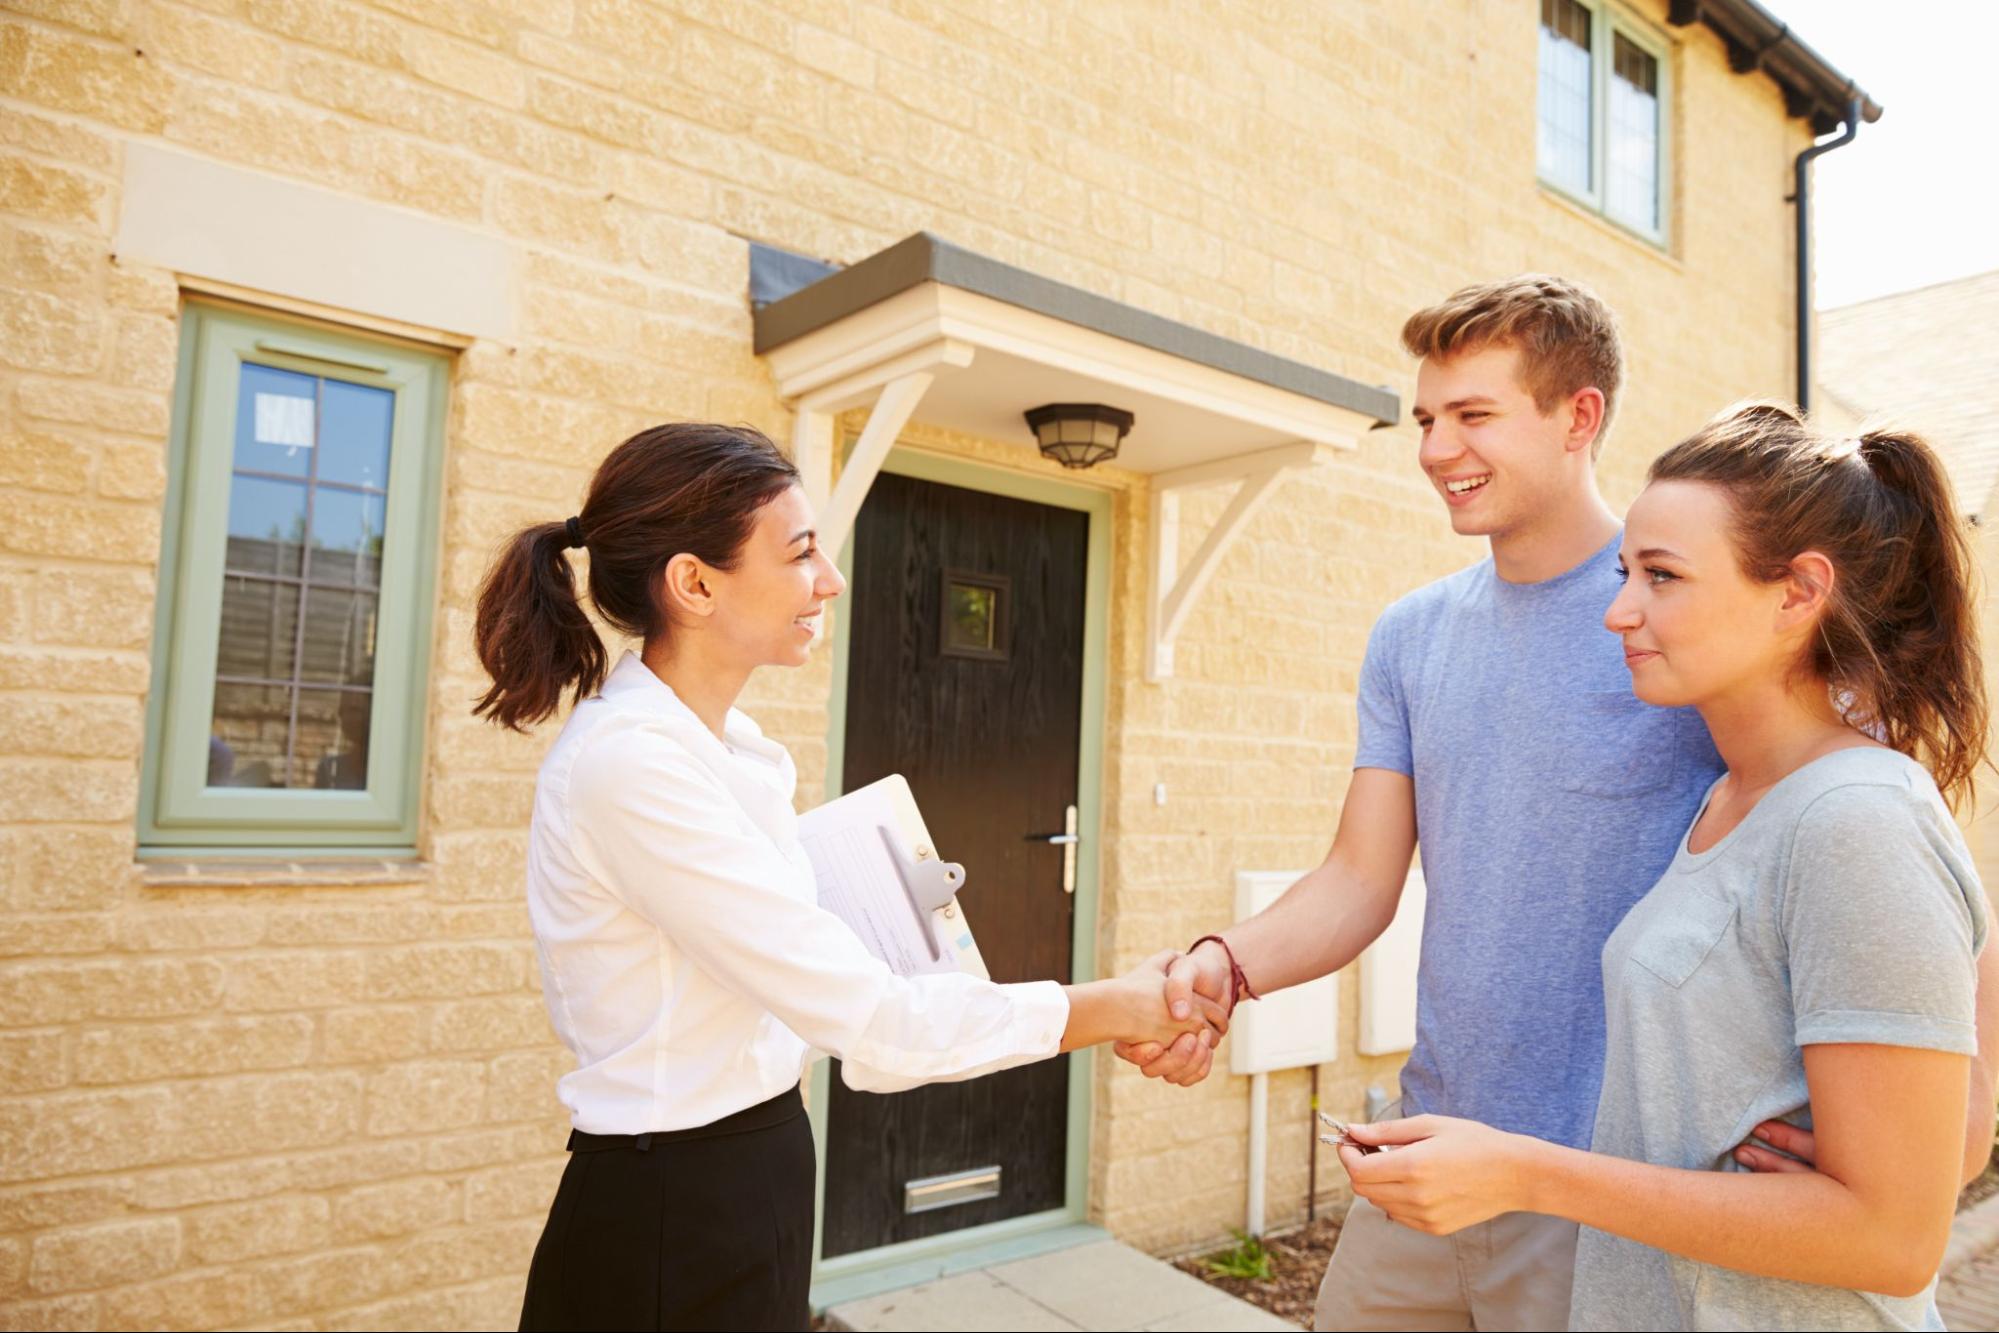 Sell Your House Fast in Colorado Springs: The Hassle-Free Way with We Buy Houses